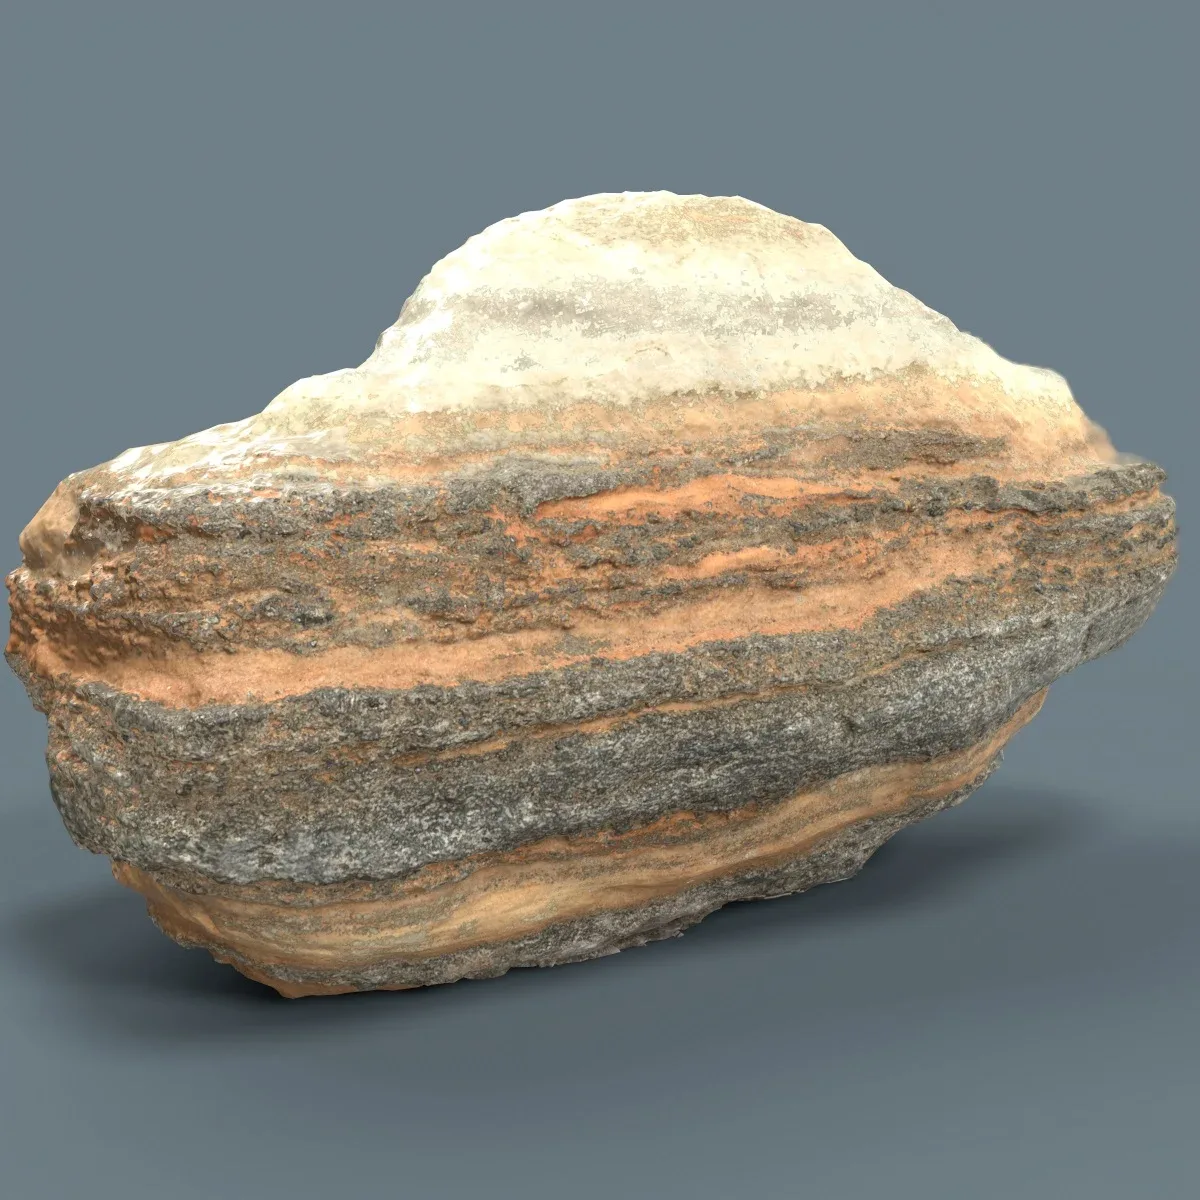 Suiseki Stone 21 from Japan - High-Quality 3D Model with Metallic-Roughness PBR Textures for Games, VR, and Art Projects